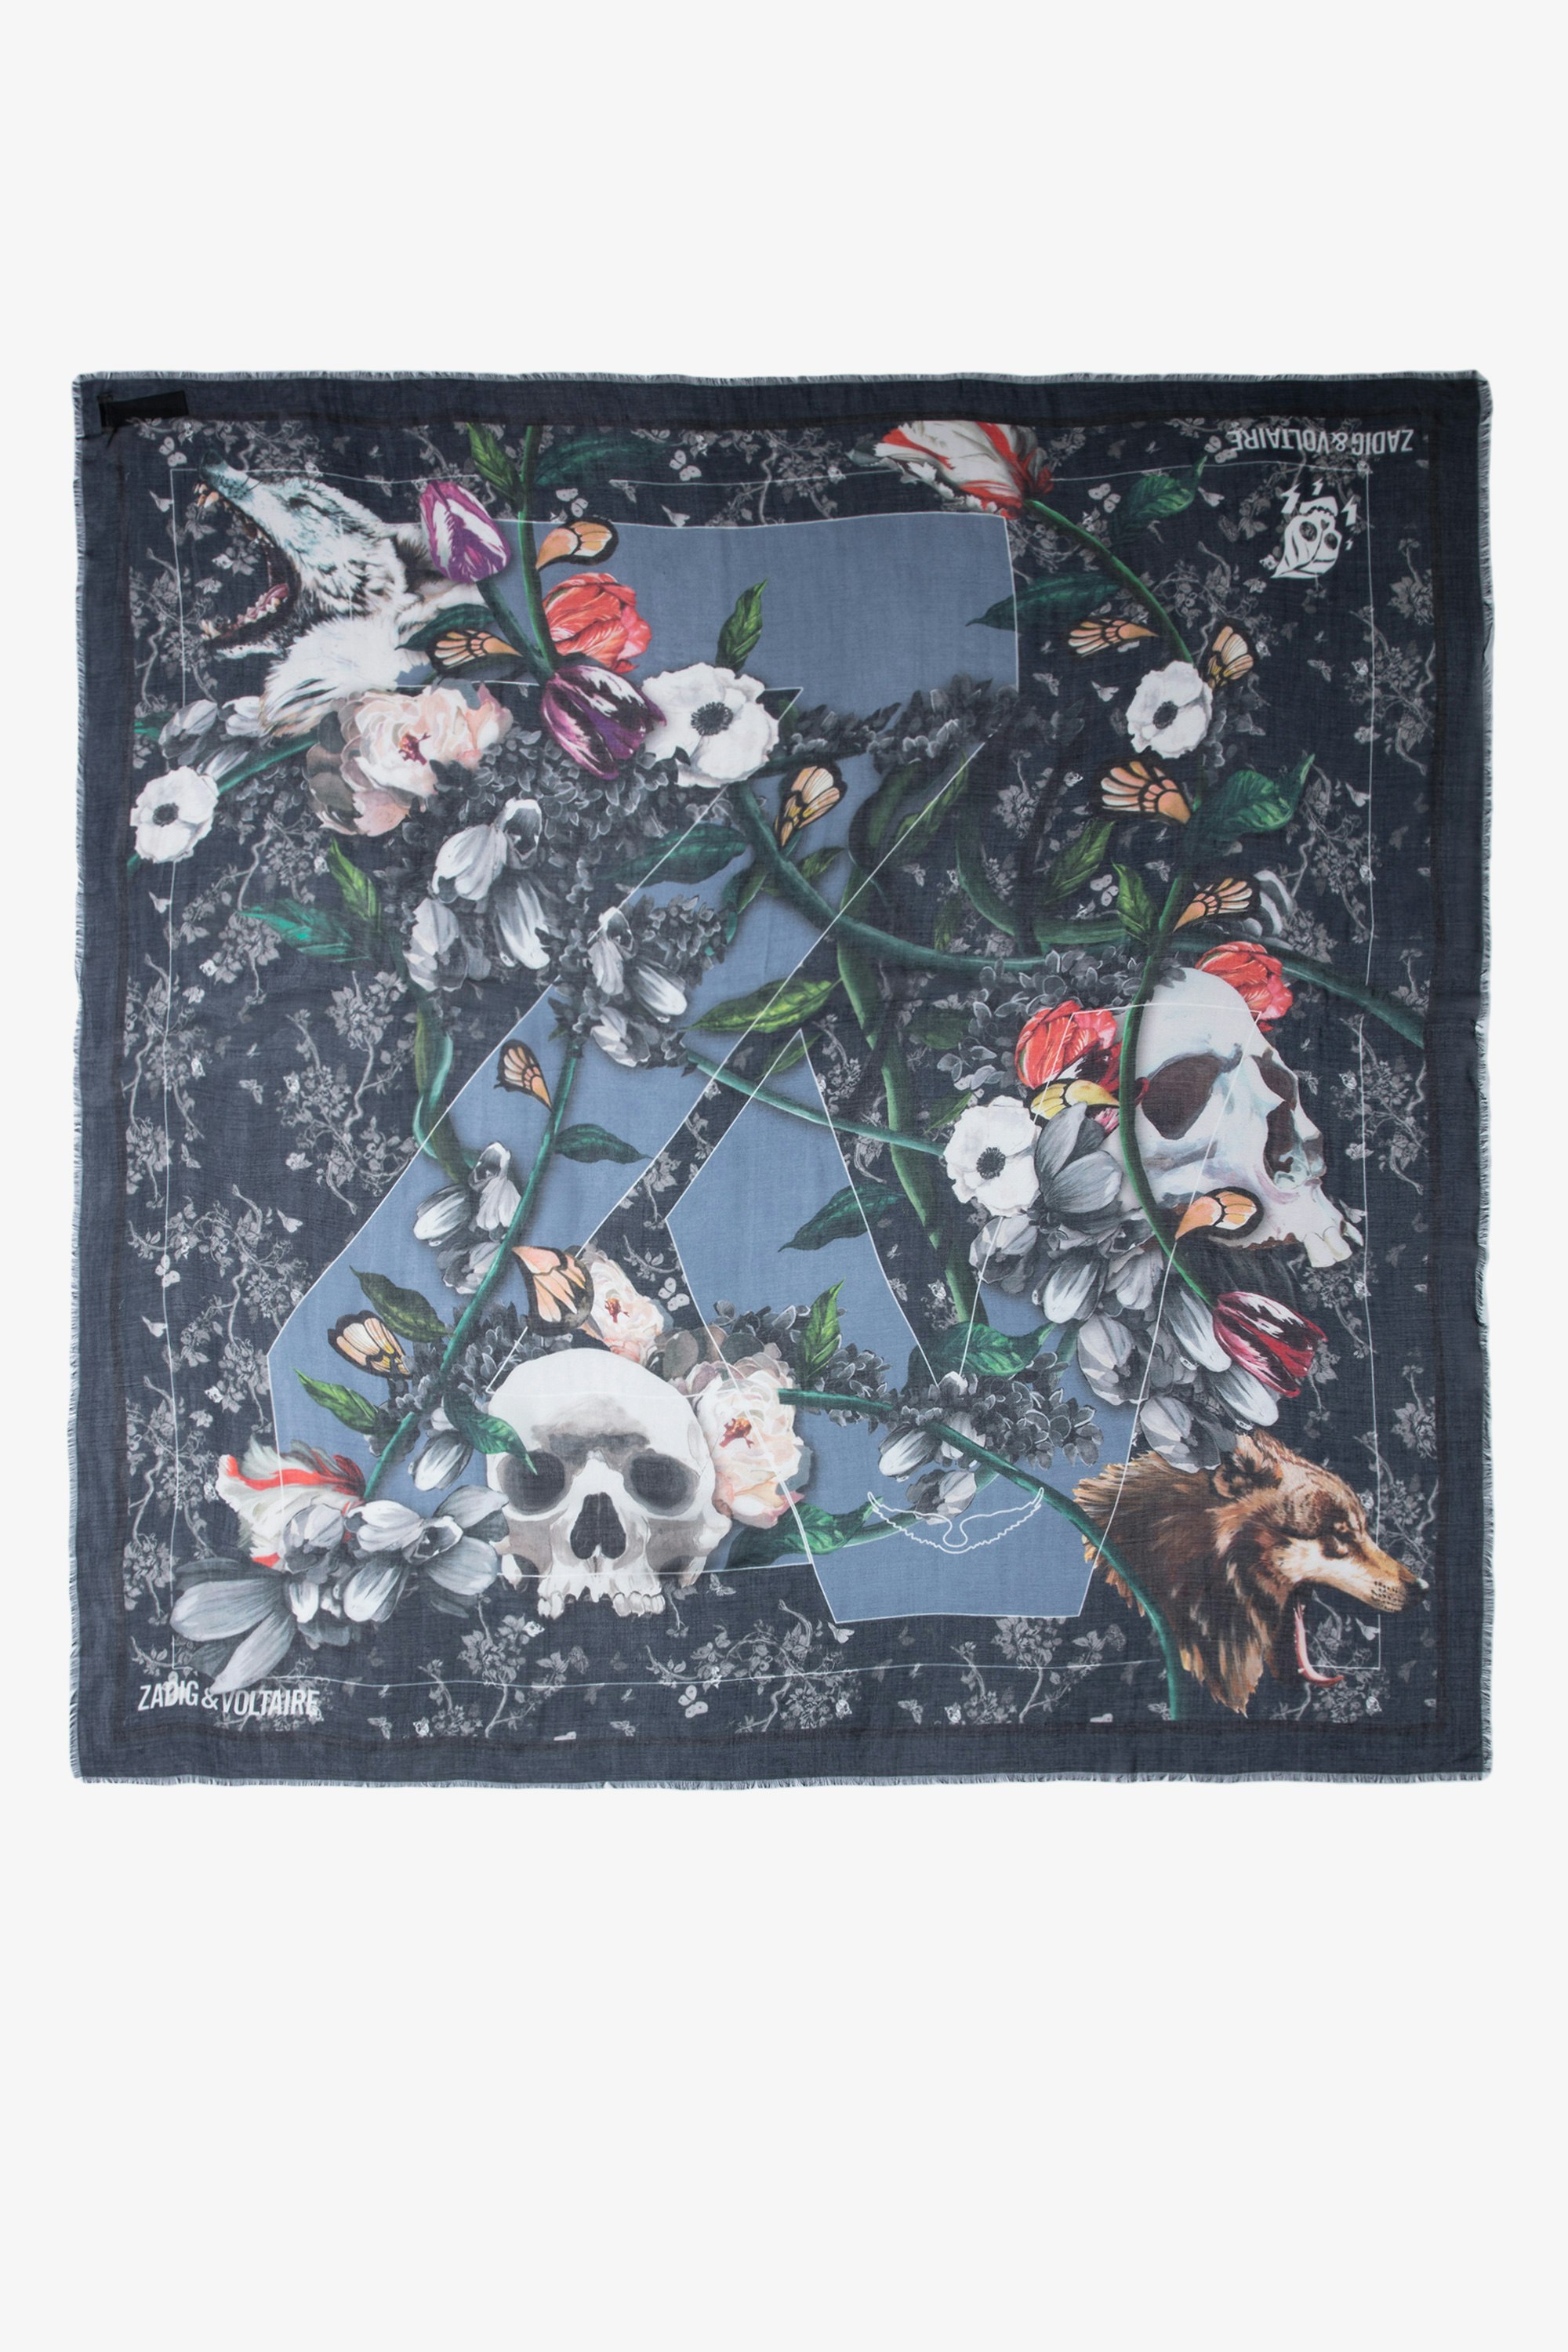 Kerry Scarf Women's black scarf printed with flowers, skulls and ZV signature